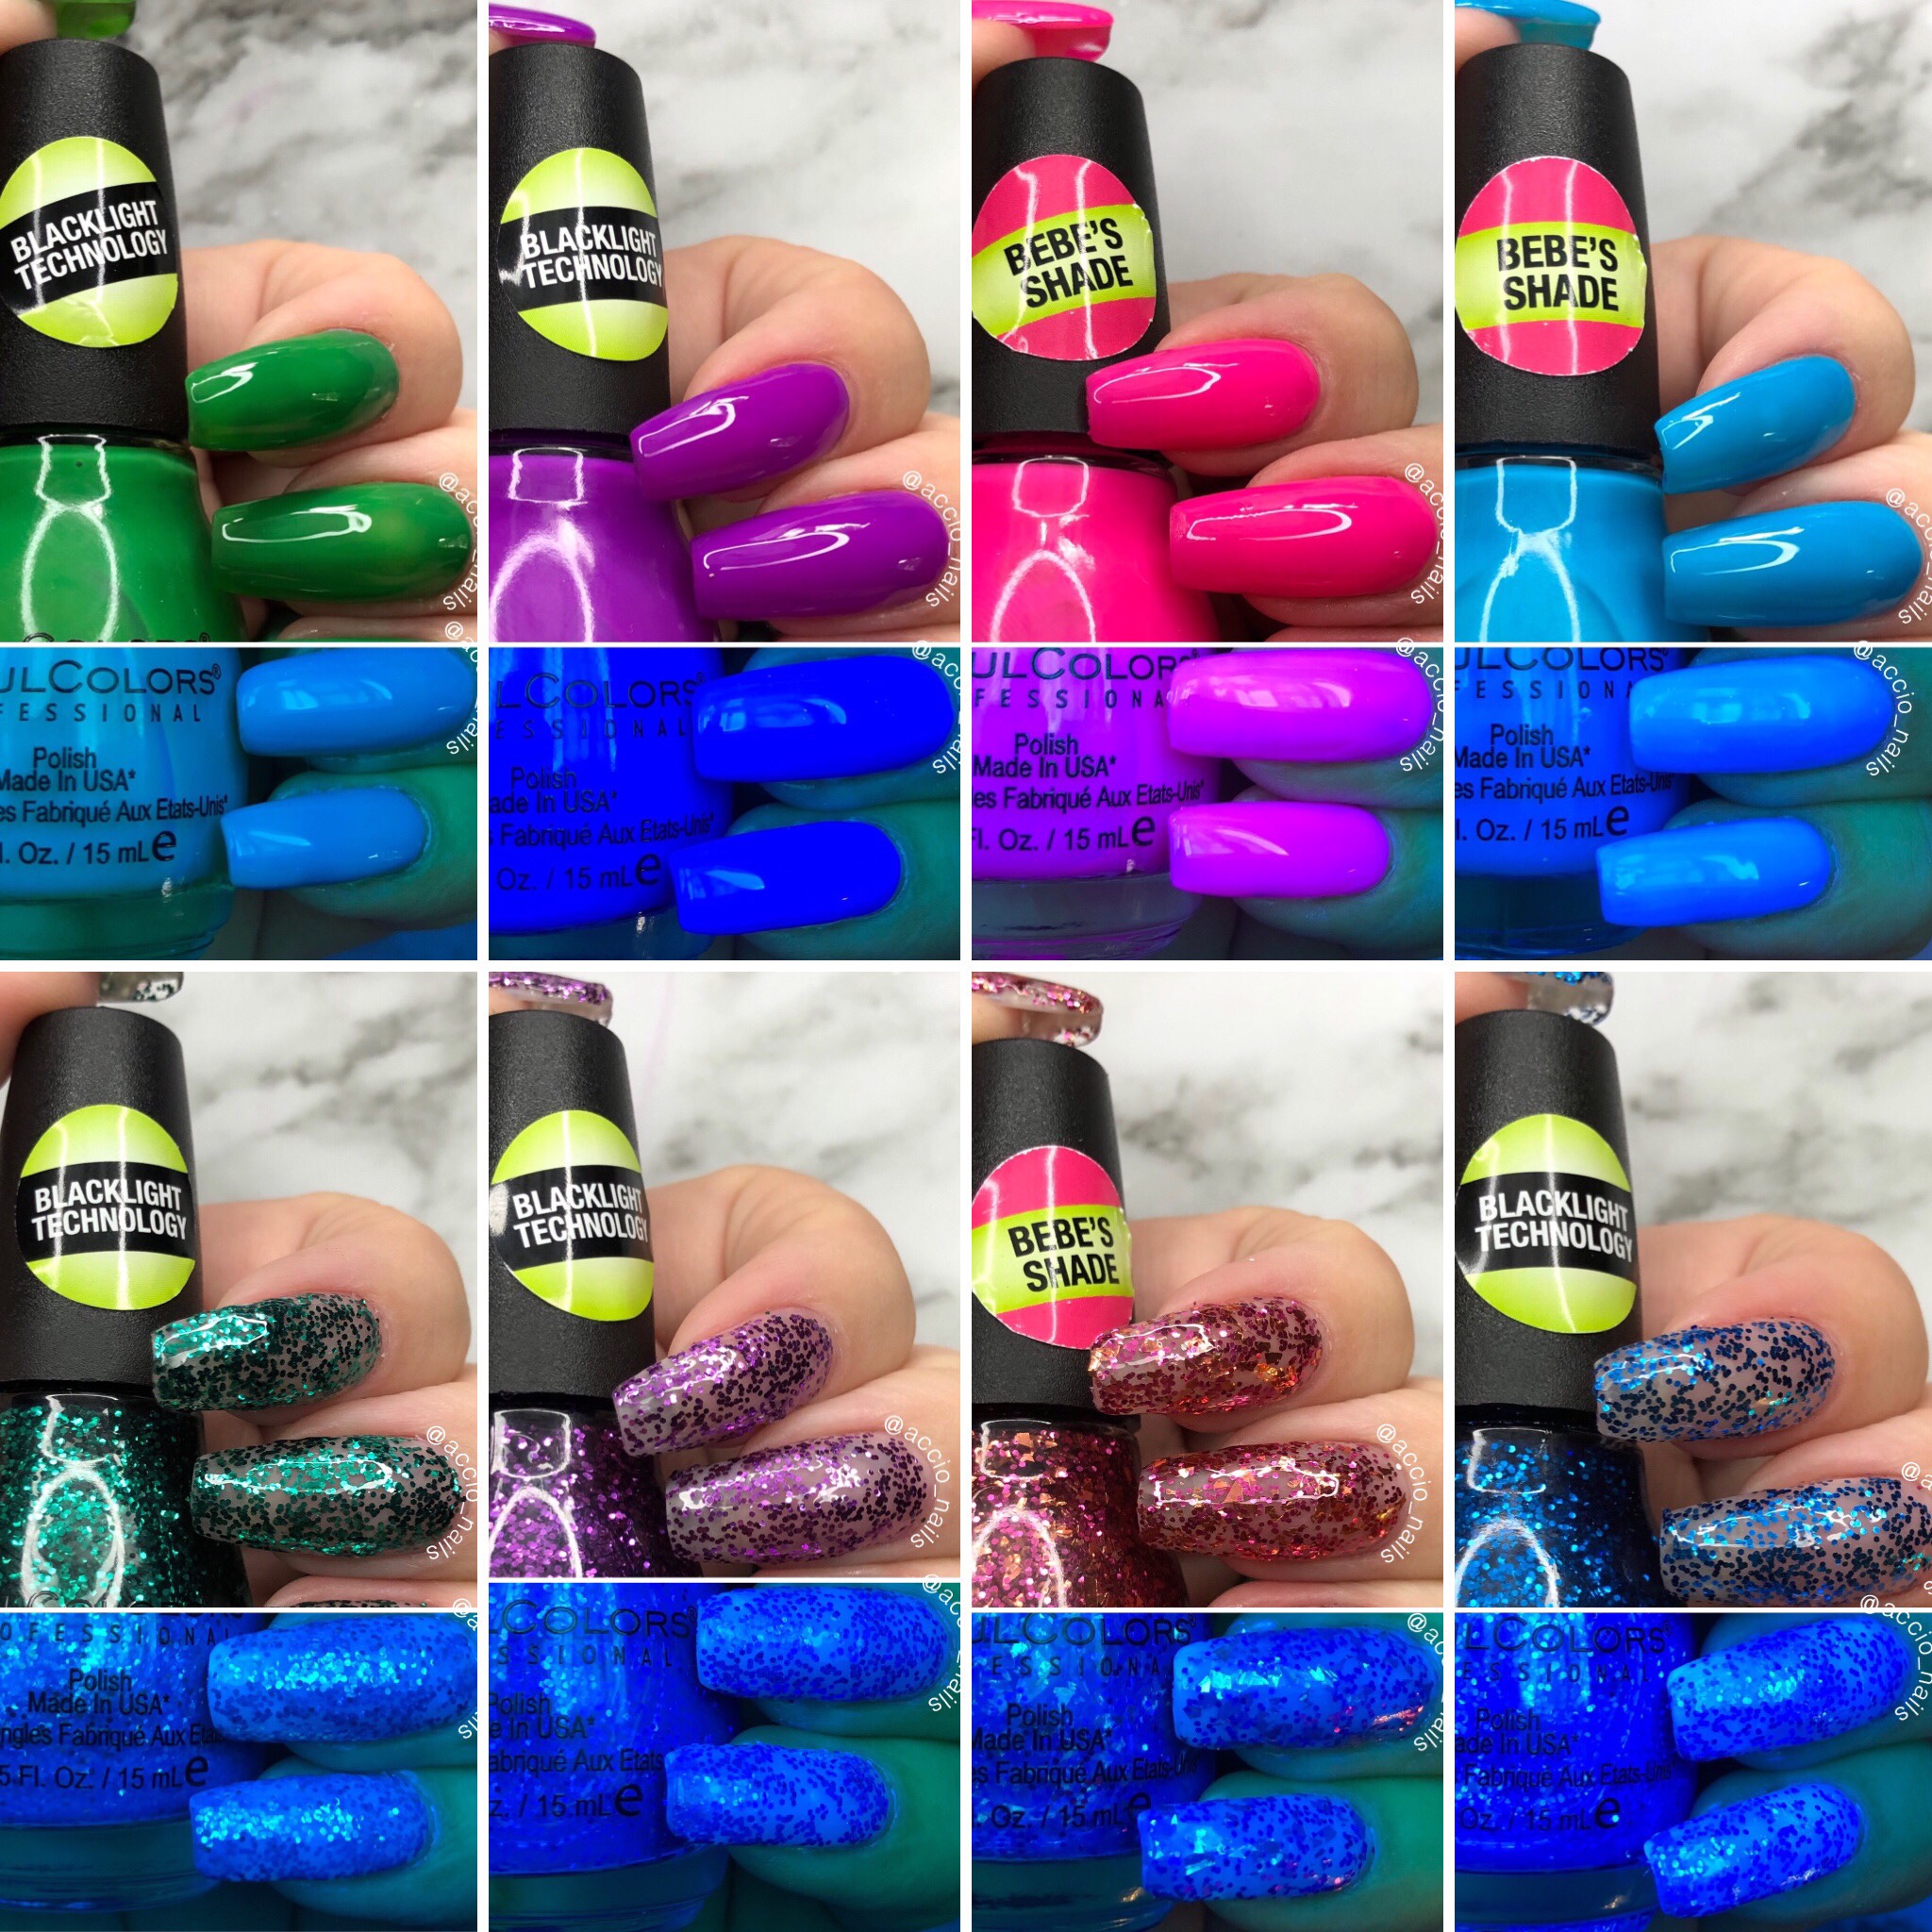 sinful colors glow in the dark